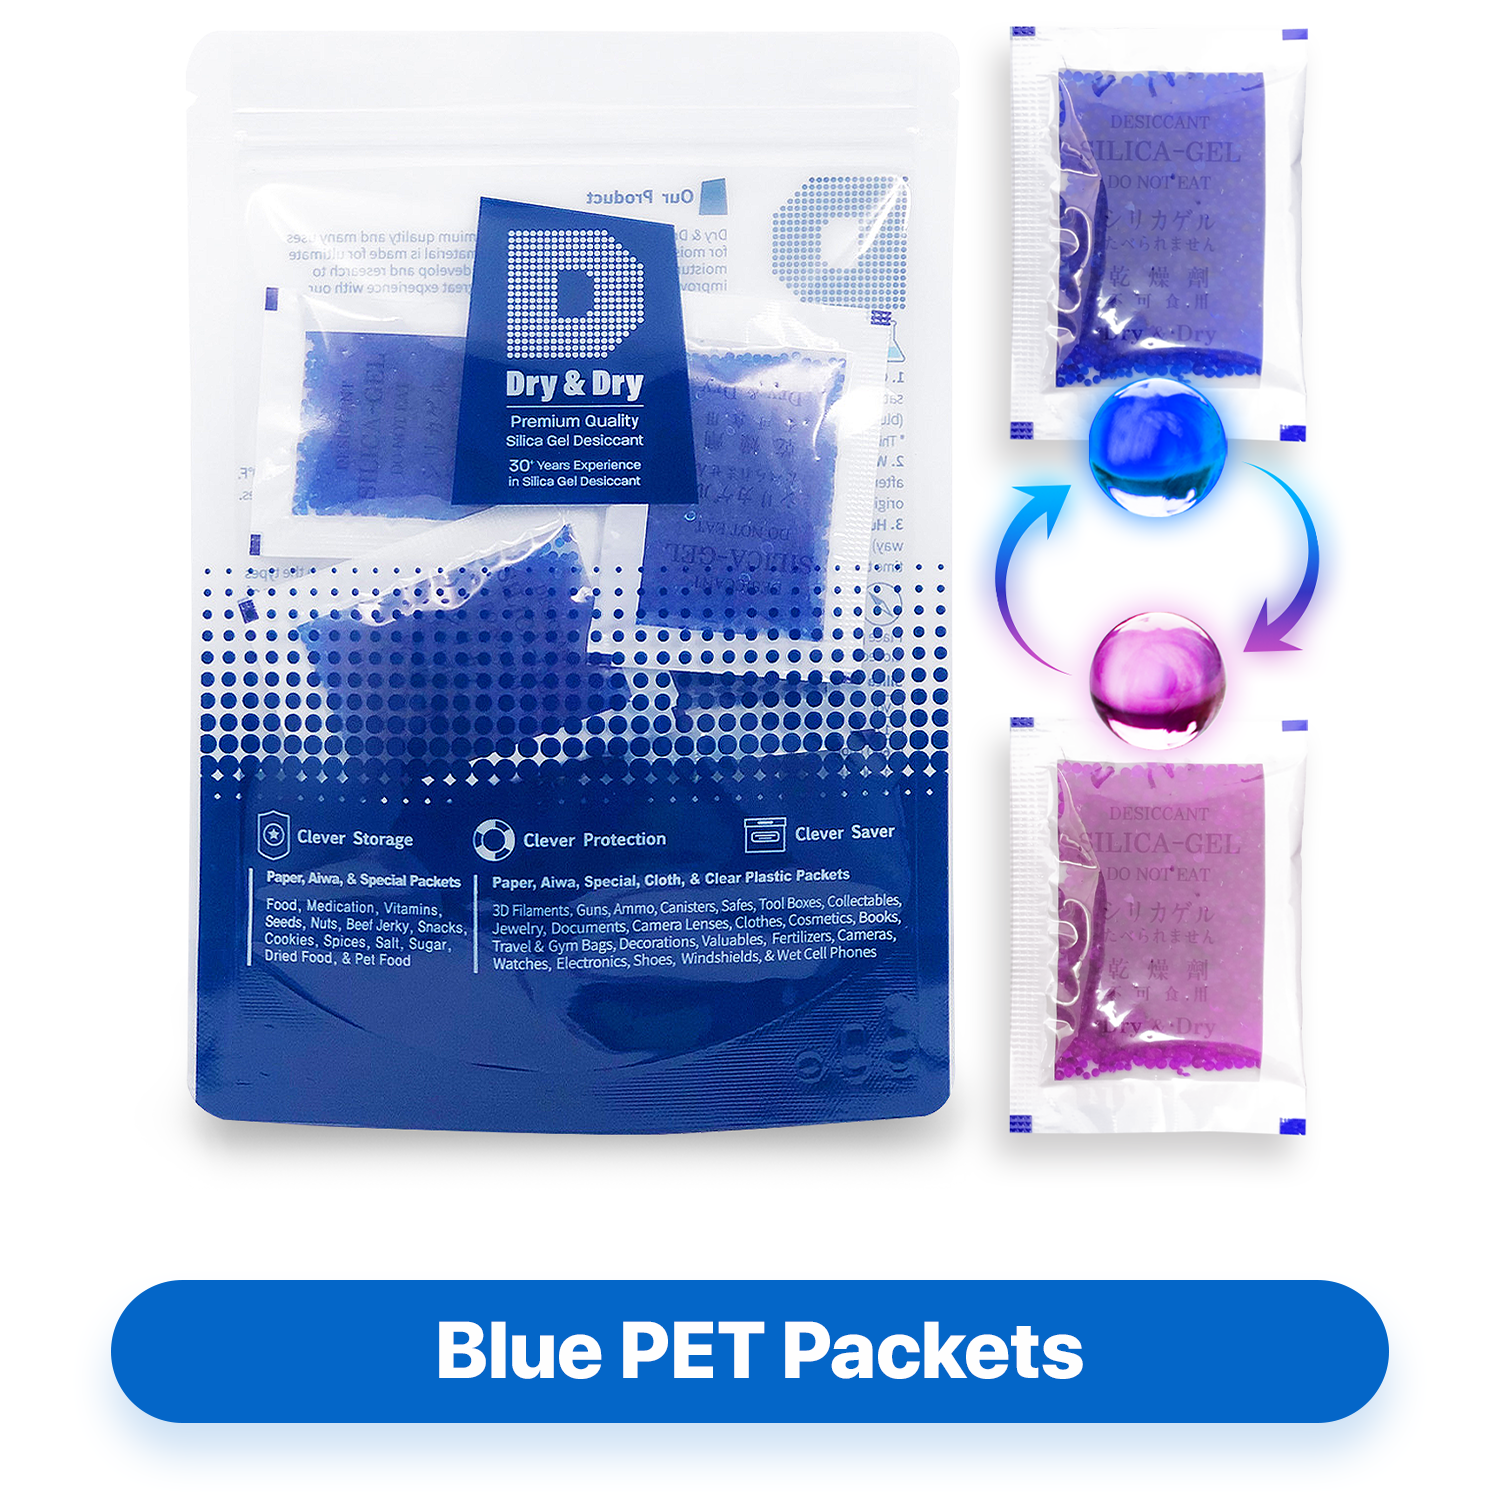 5 Gram Blue Indicating Clear Plastic(PET) Silica Gel Packets